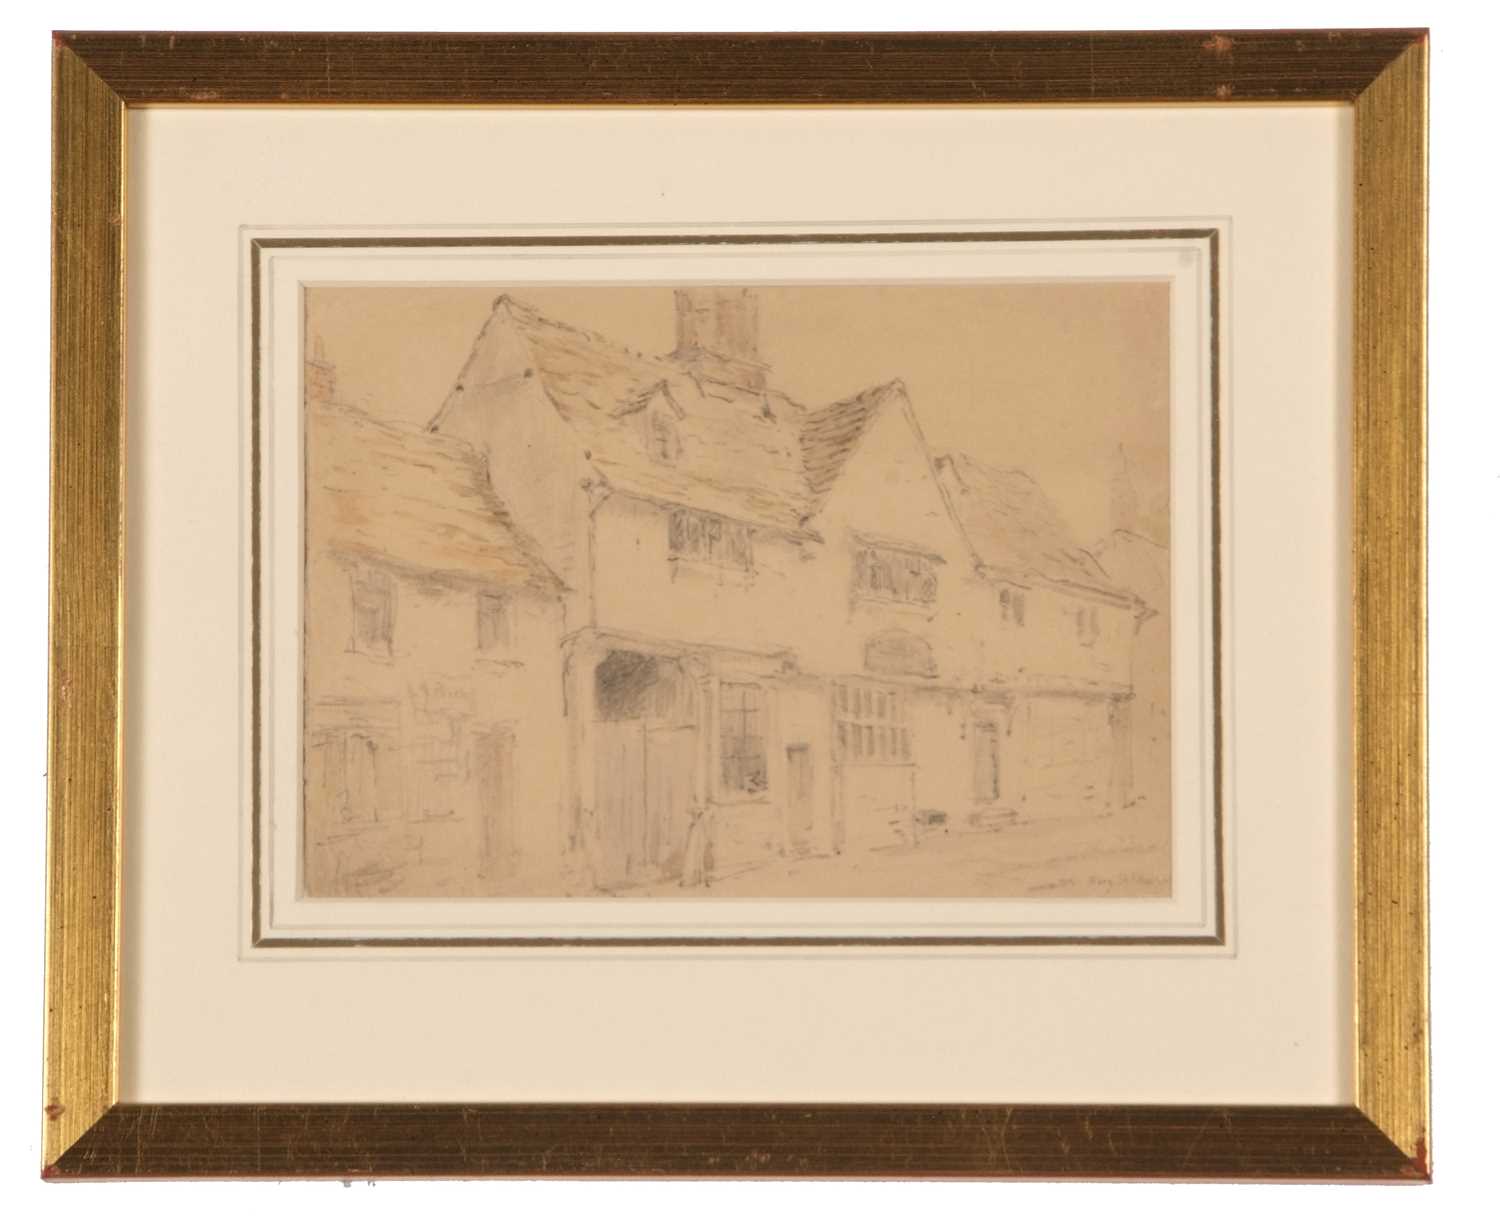 British school, 19th century, 'Bury St Edmunds', pencil and watercolour on paper, inscribed c.1880 - Image 2 of 2